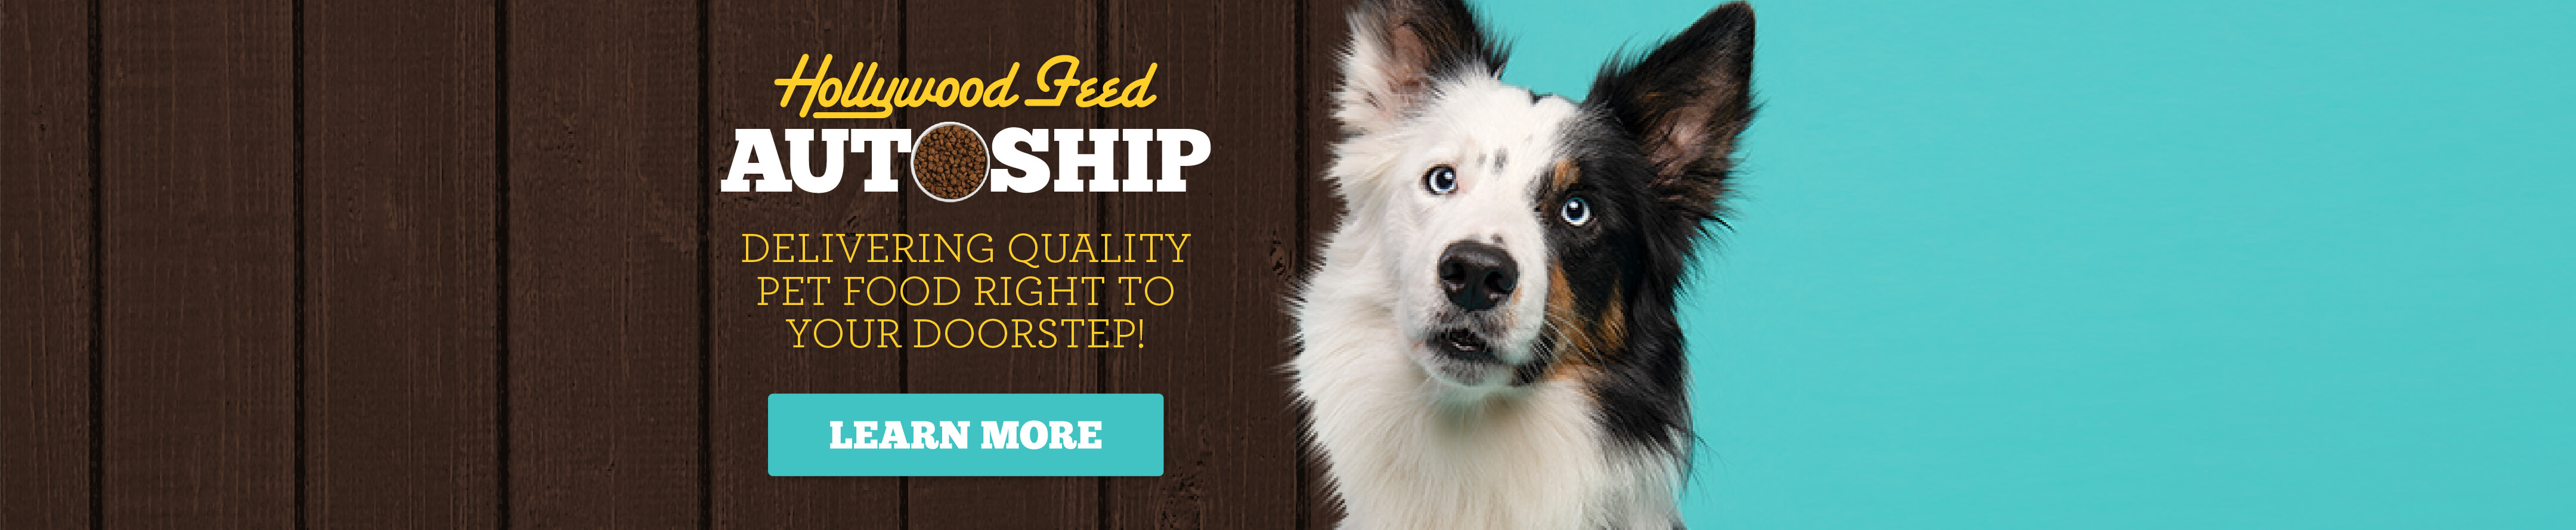 Hollywood Feed Autoship, Sign up today,schedule regular deliveries of your pet's favorite food or treats, rotate through formulas and sizes as often as necessary and ensure you never run out, you can postpone reschedule or cancel your autoship at any time, link to shop autoship items now